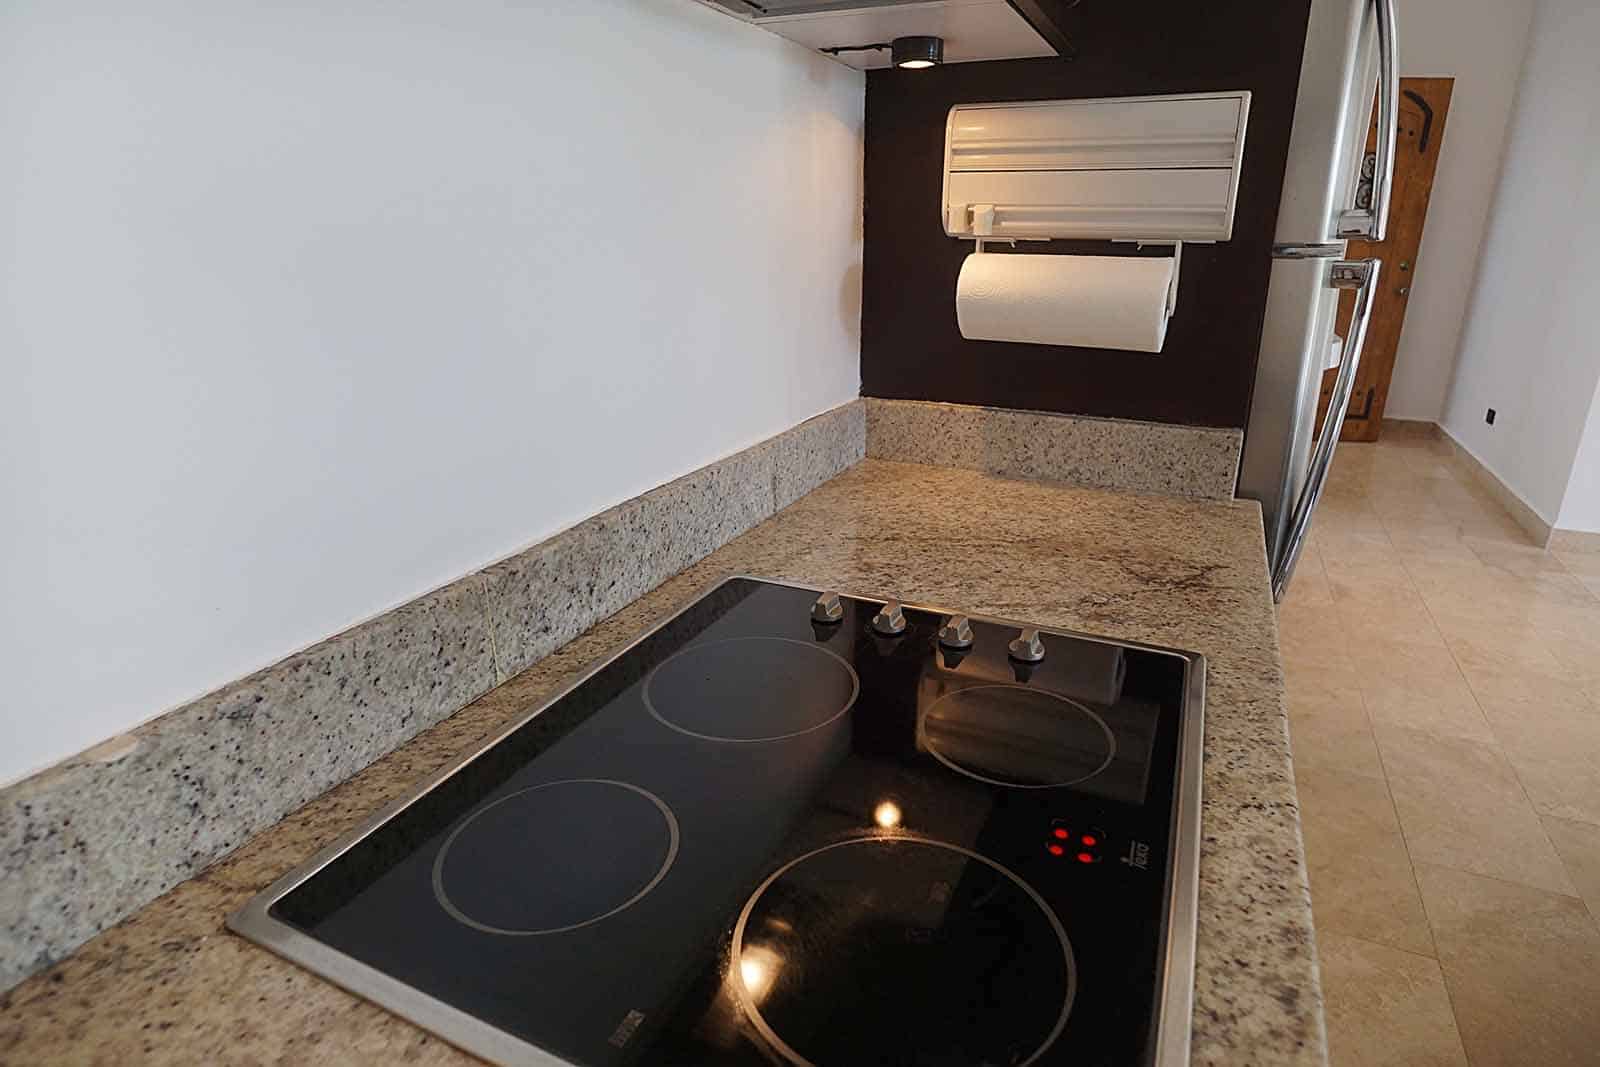 Casa Blanca D3 cooktop and oven